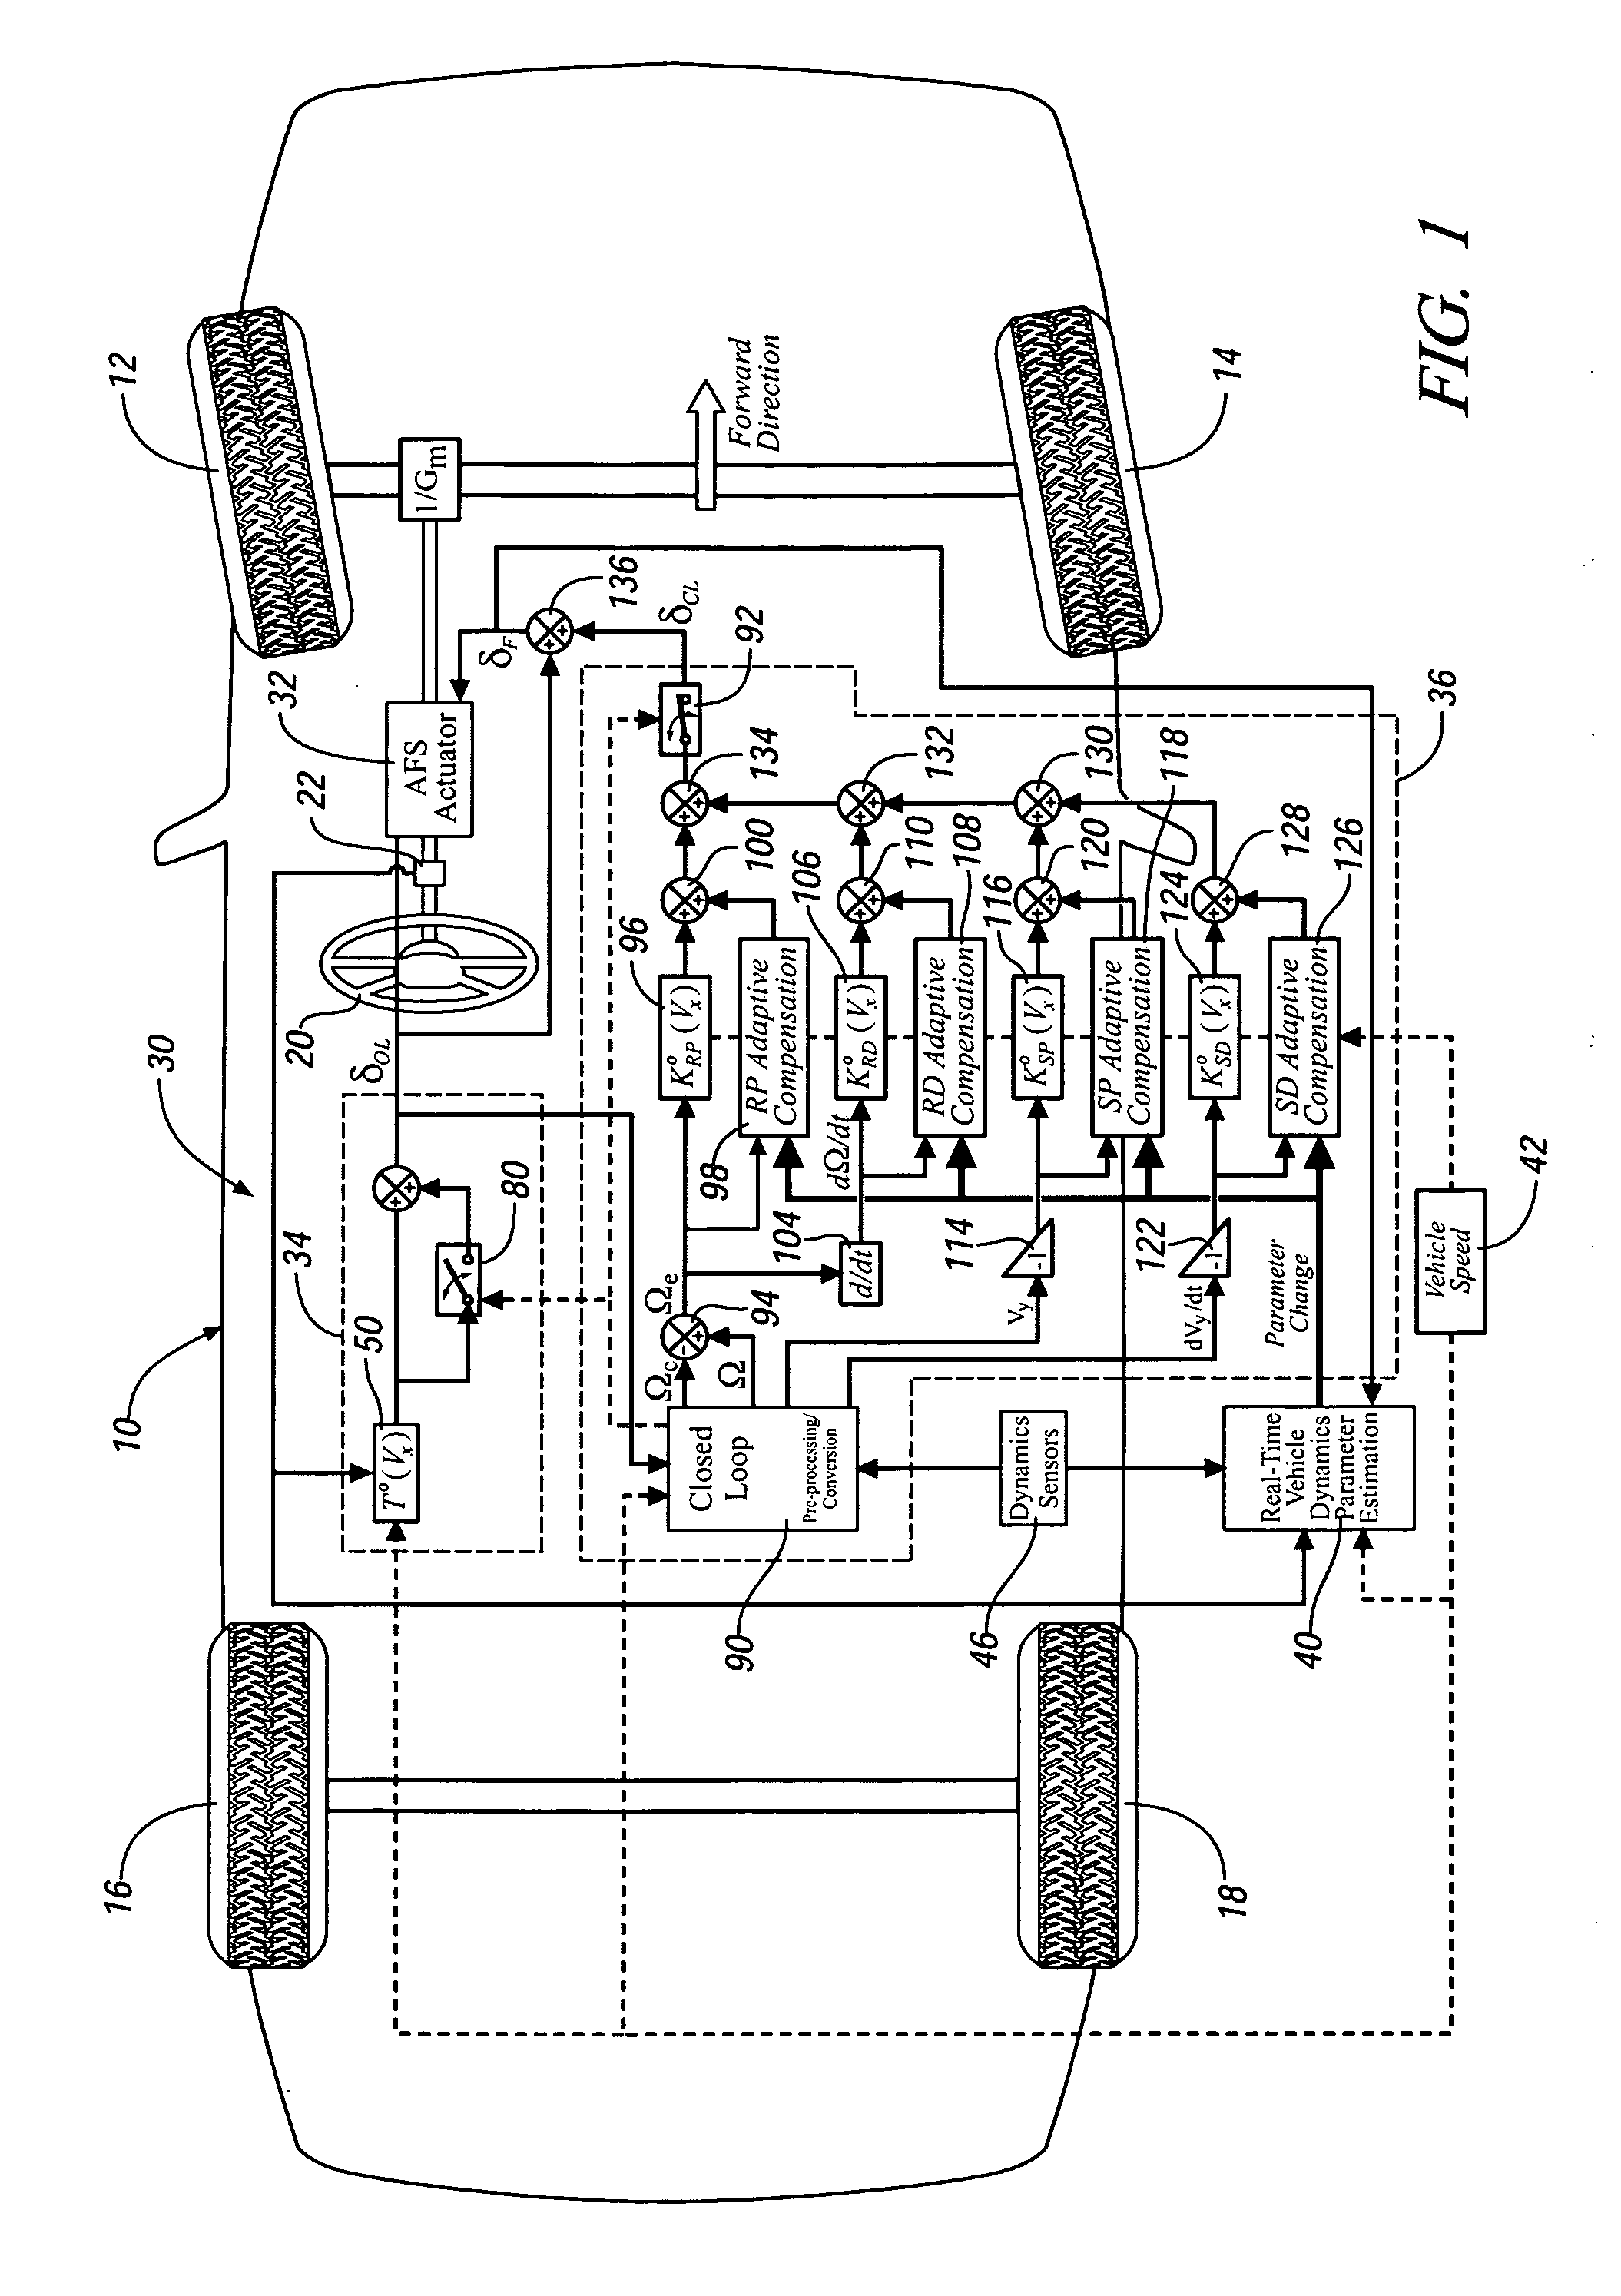 Method and system for adaptively compensating closed-loop front-wheel steering control